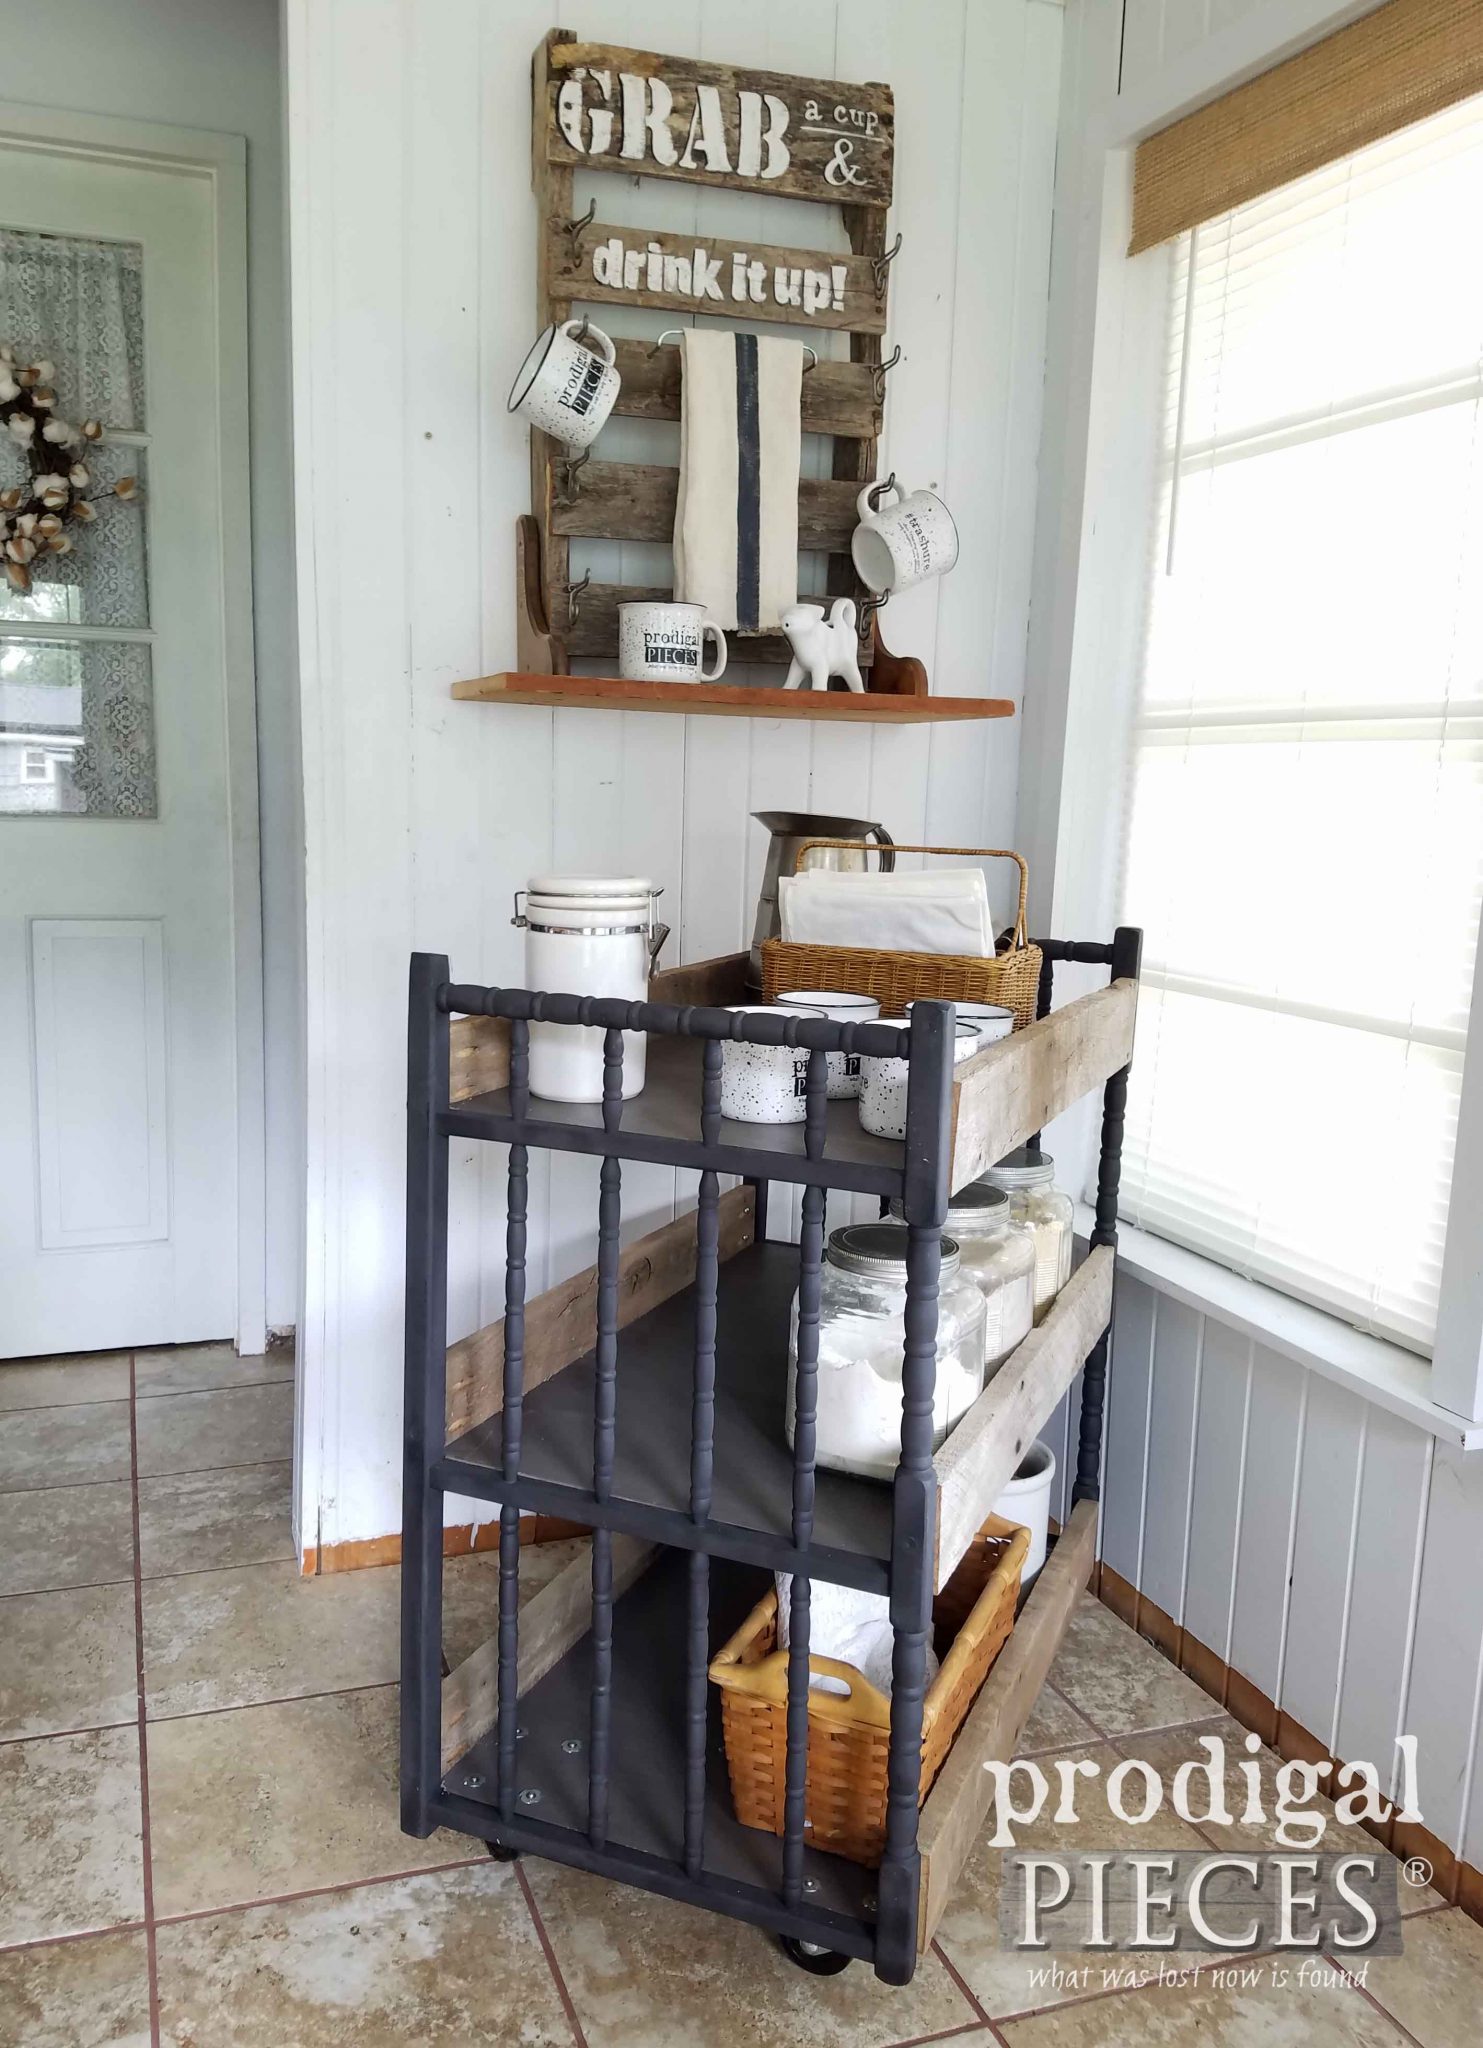 DIY Cart Made Using a Baby Changing Table by Prodigal Pieces | prodigalpieces.com